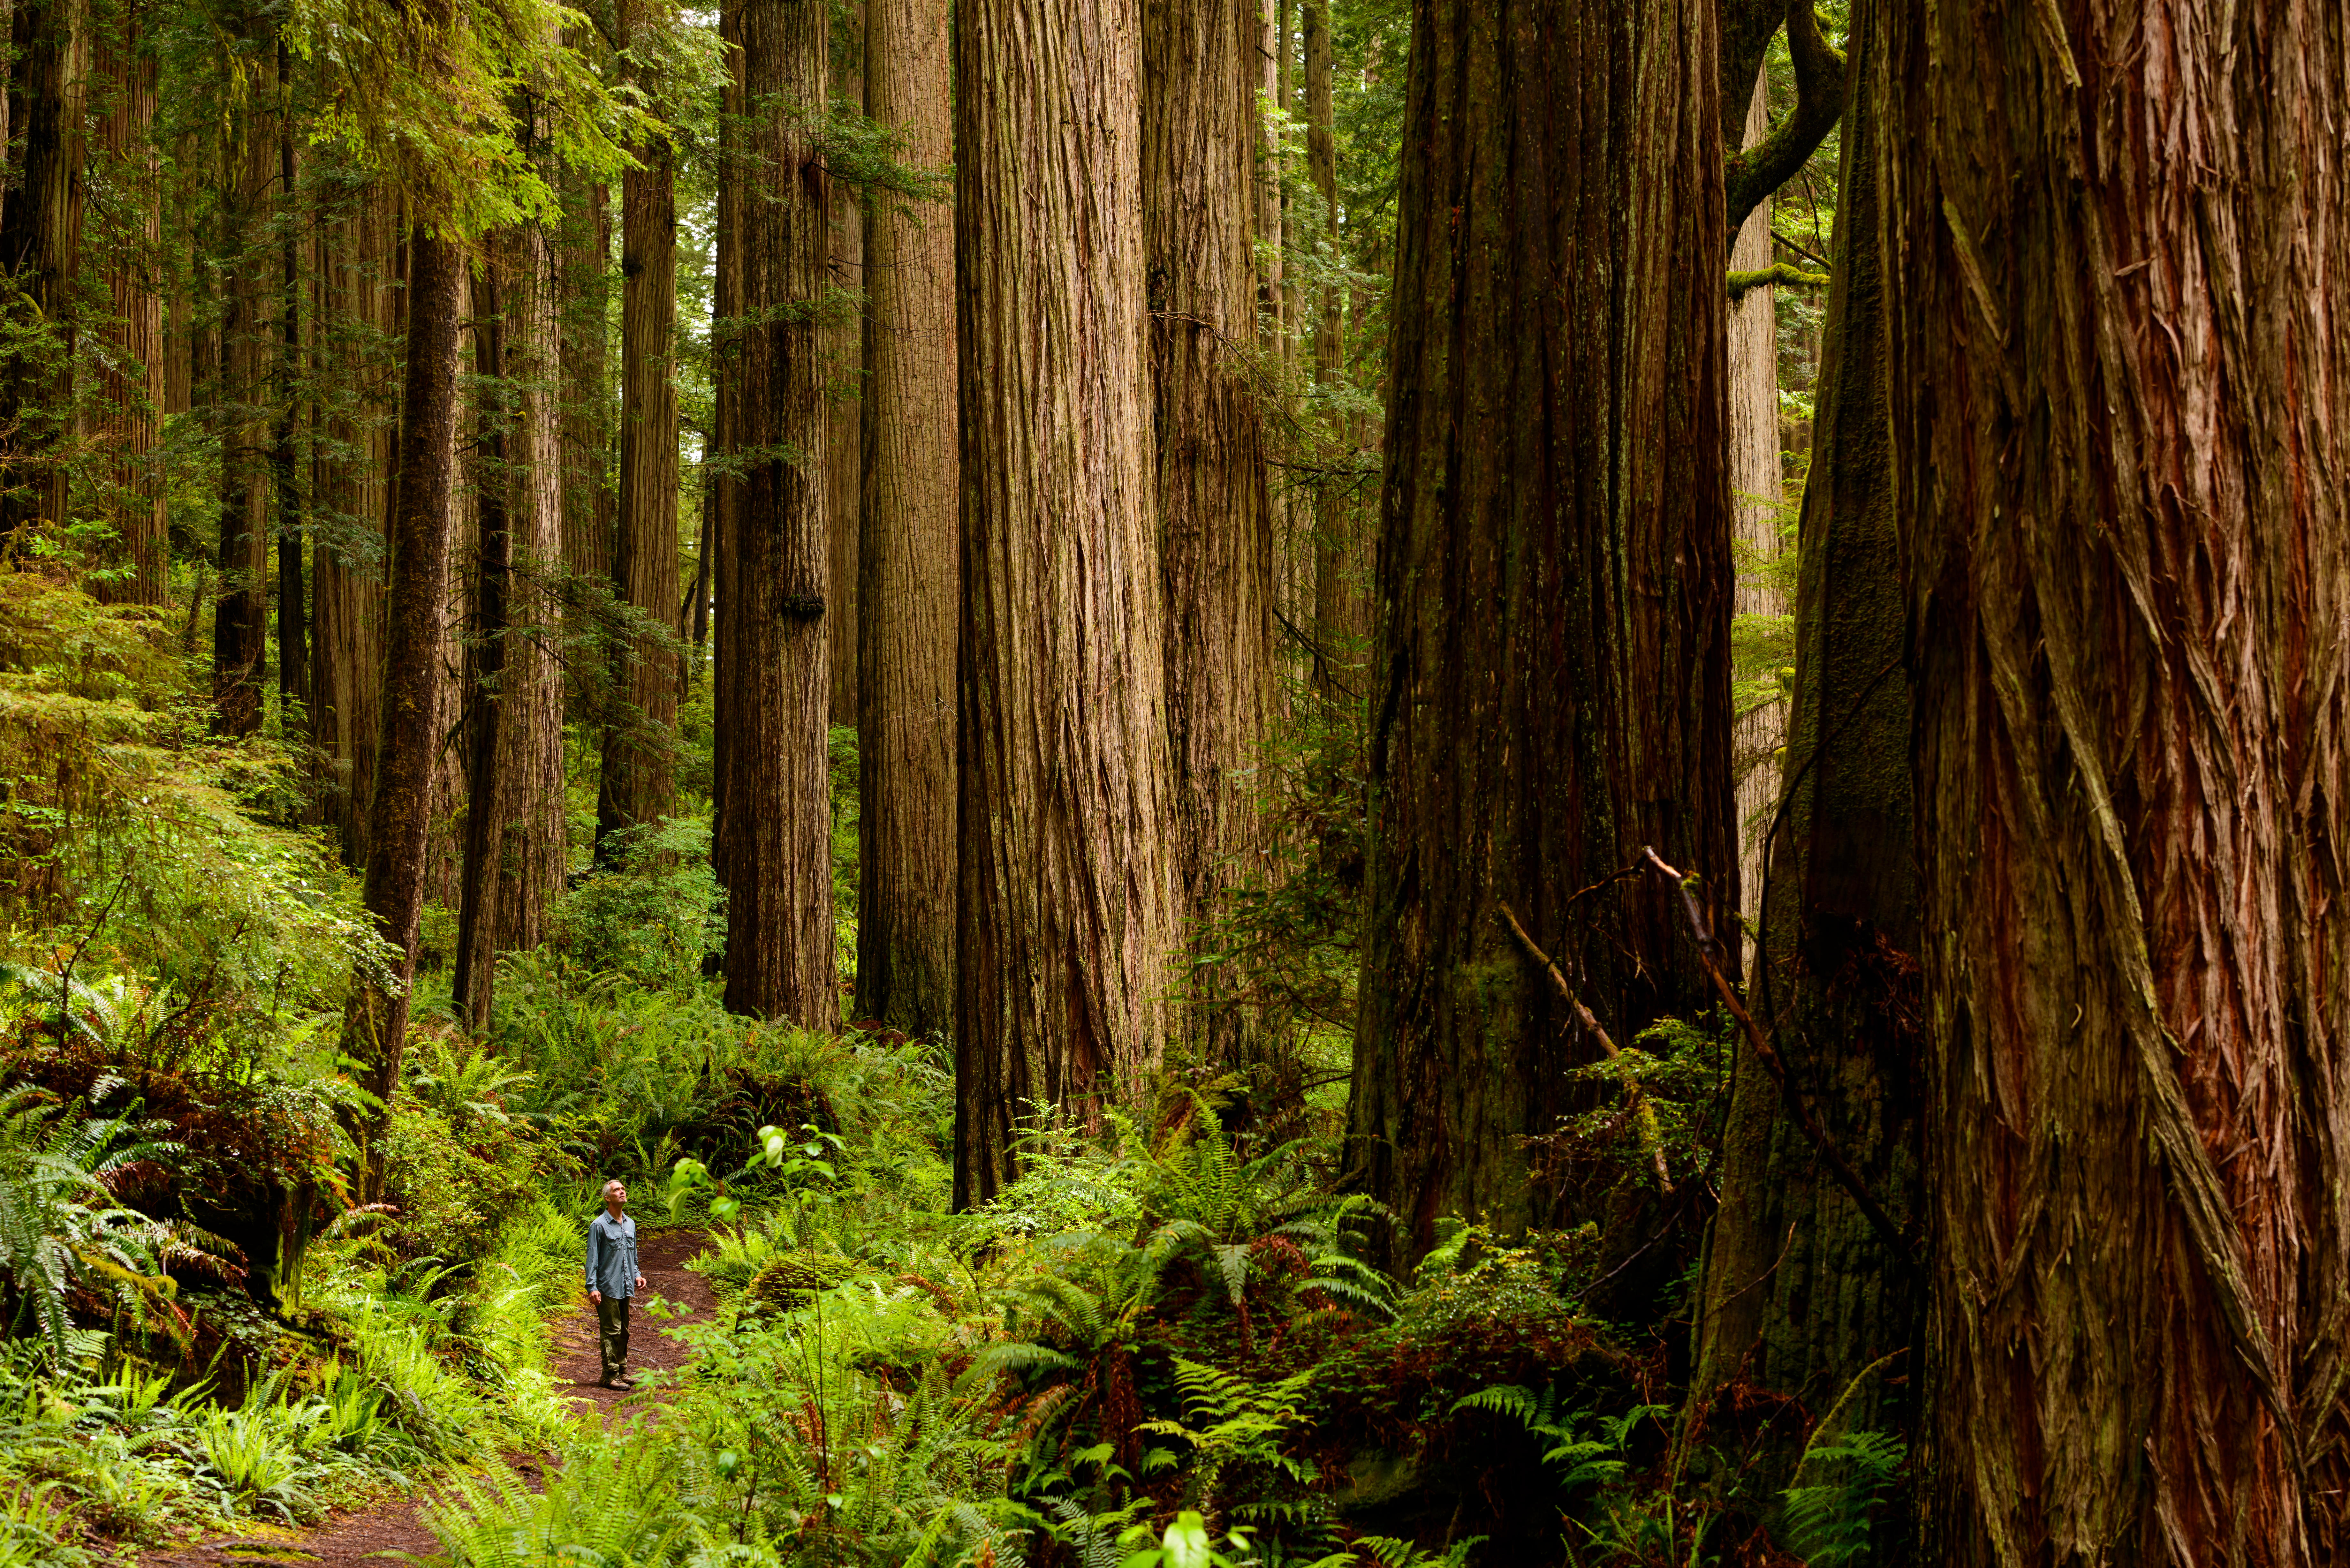 A walker dwarfed by giant redwoods in a forest in northern California